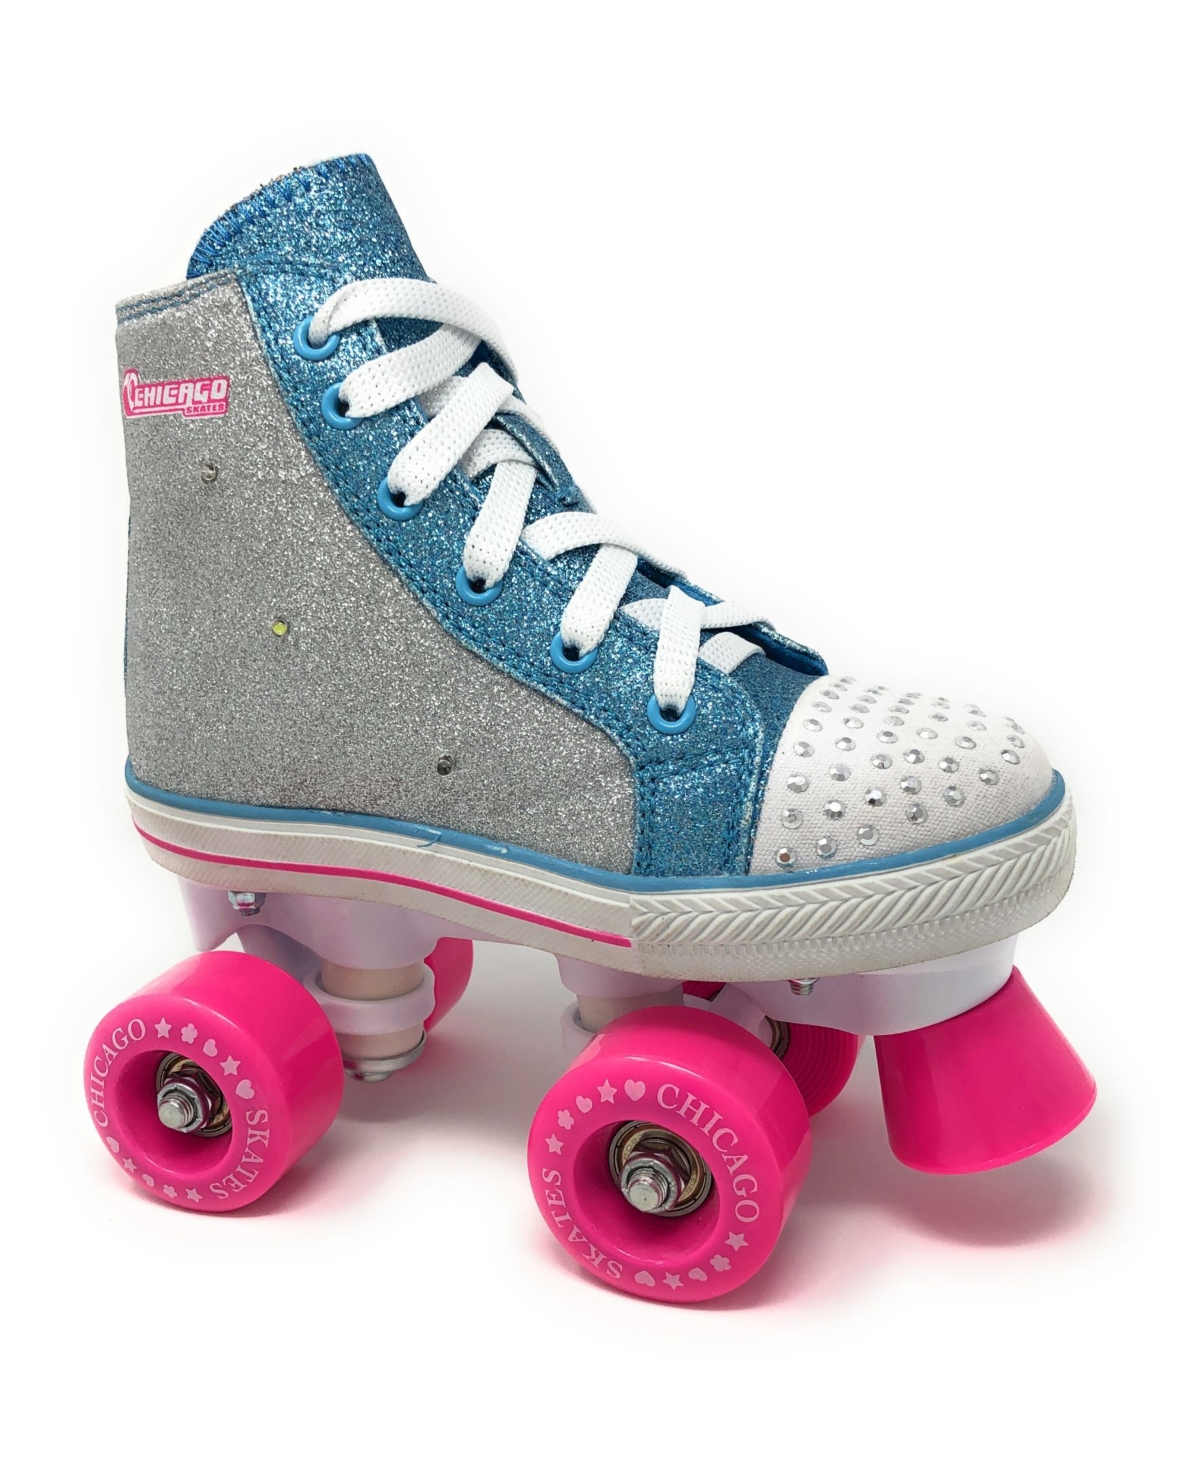 Fashion All-Star Quad Roller Skate - Size 2 - Miscellaneous